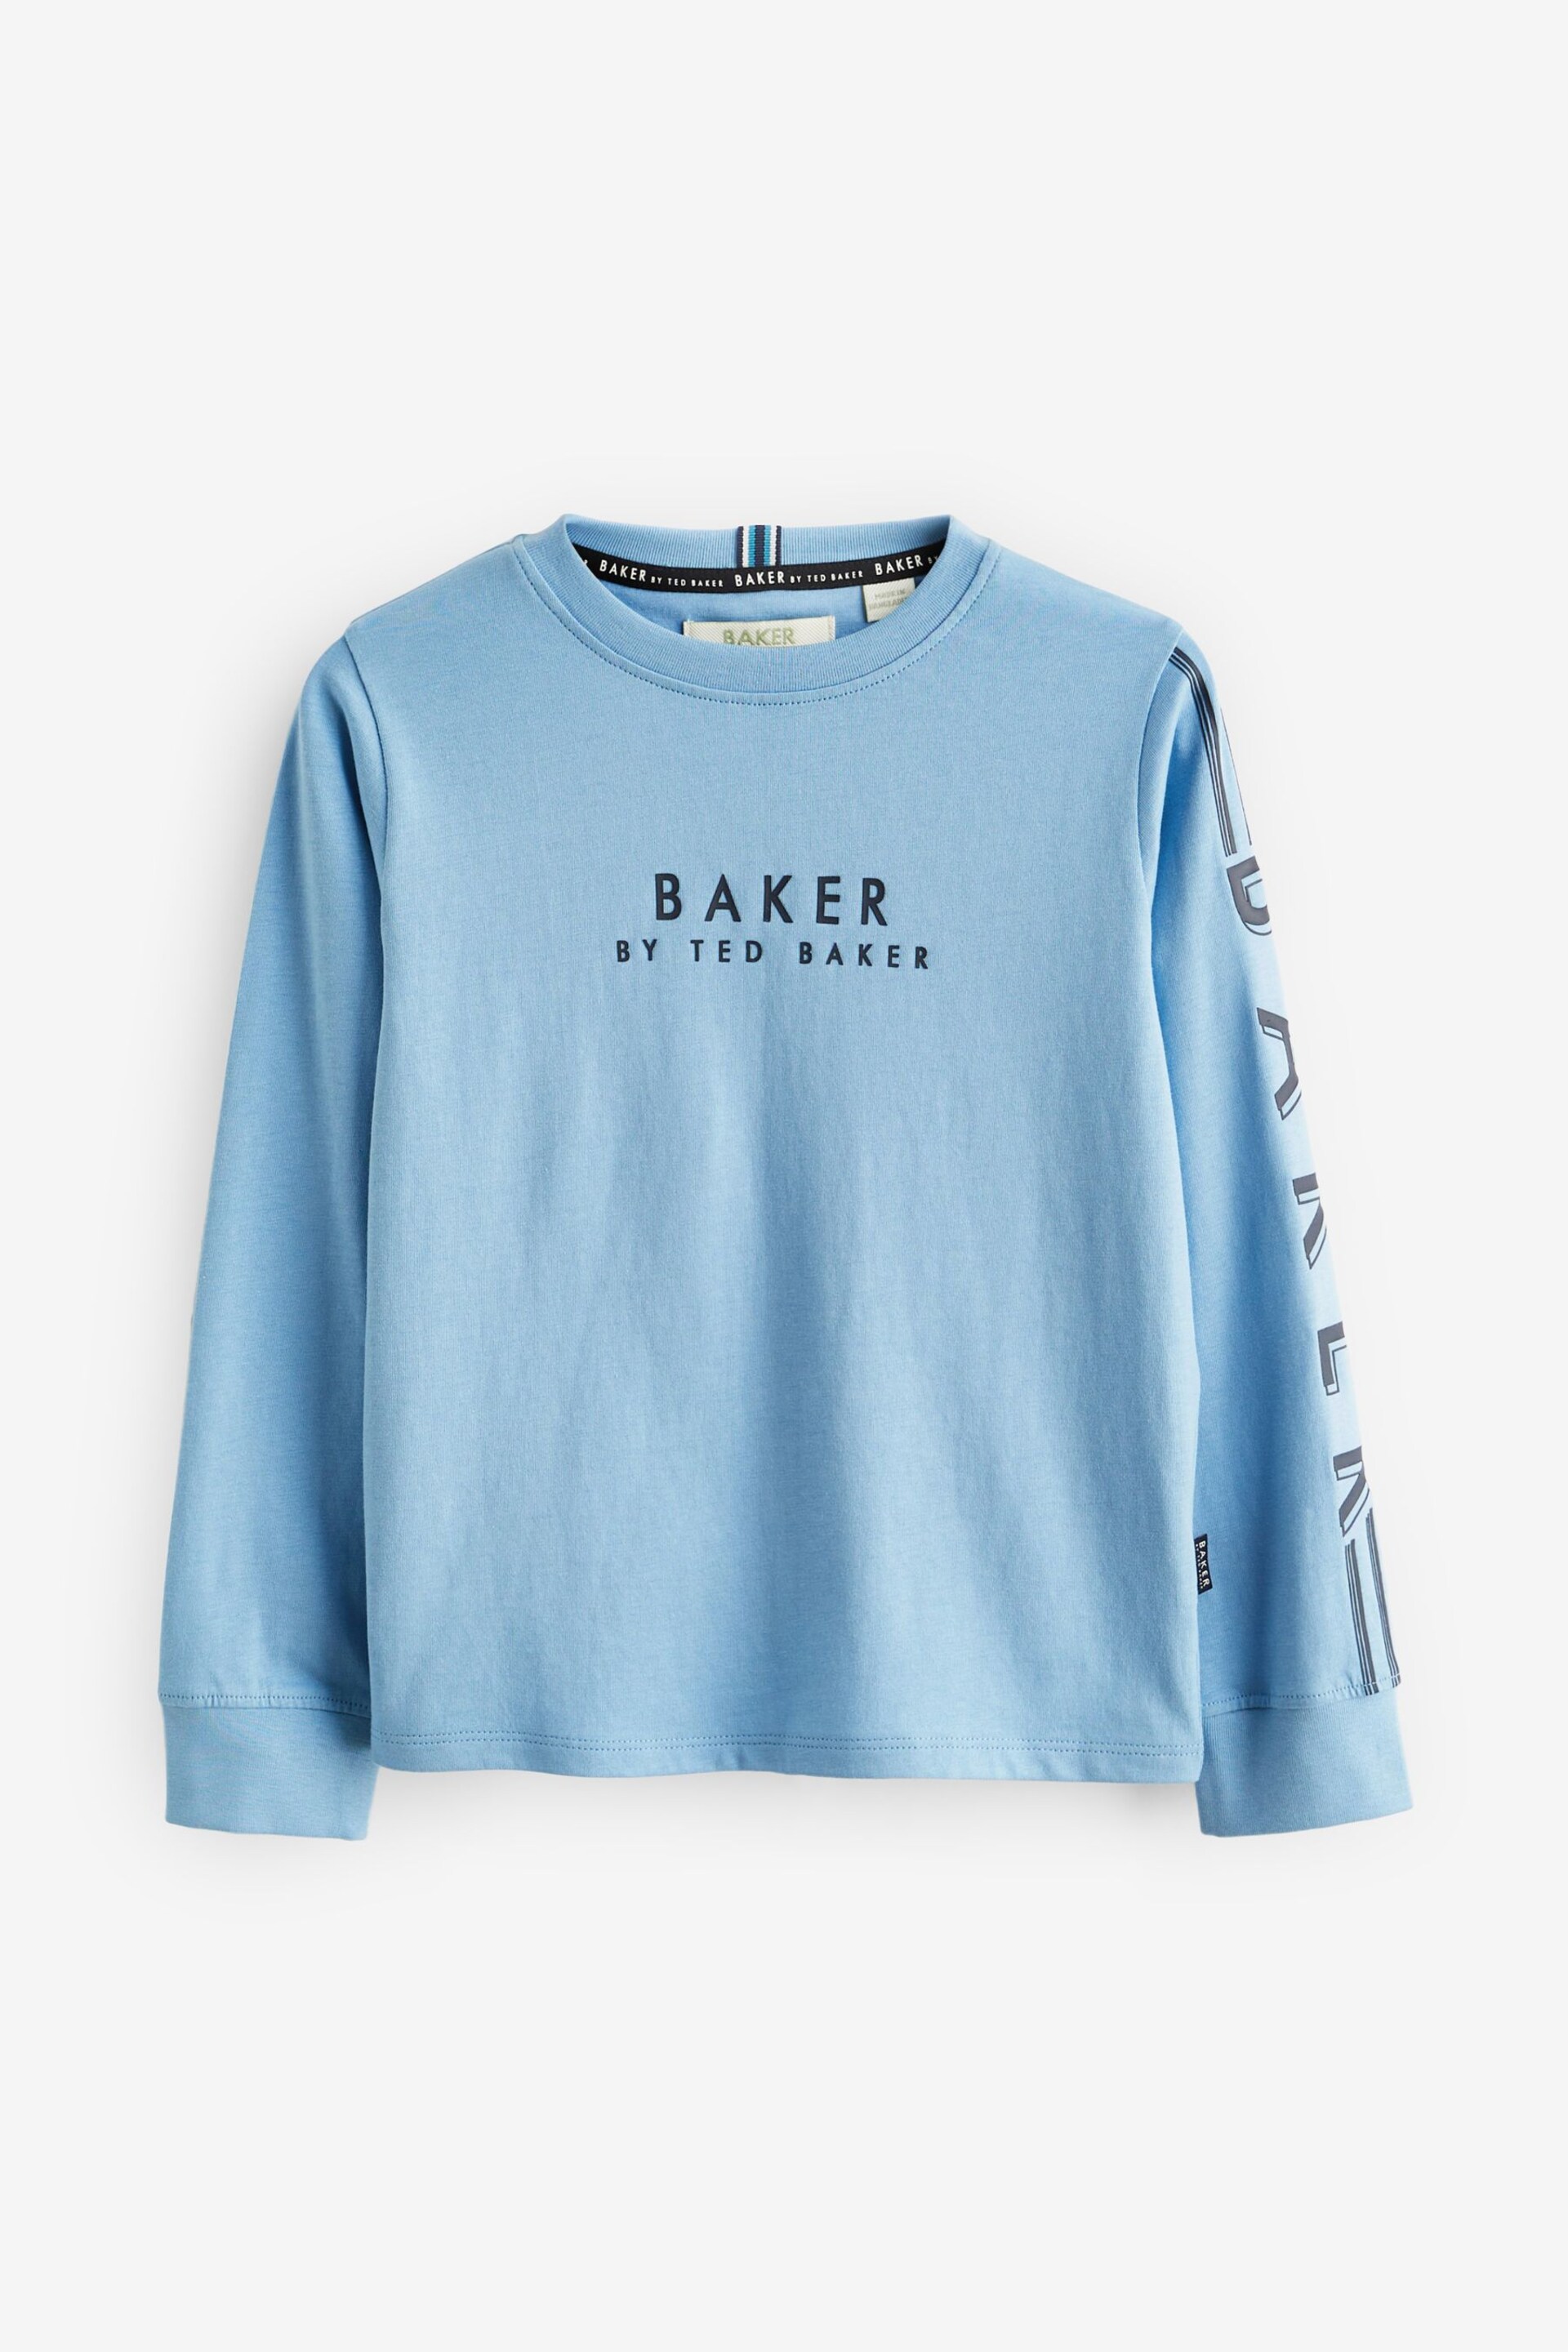 Baker by Ted Baker Long Sleeve T-Shirt - Image 11 of 14